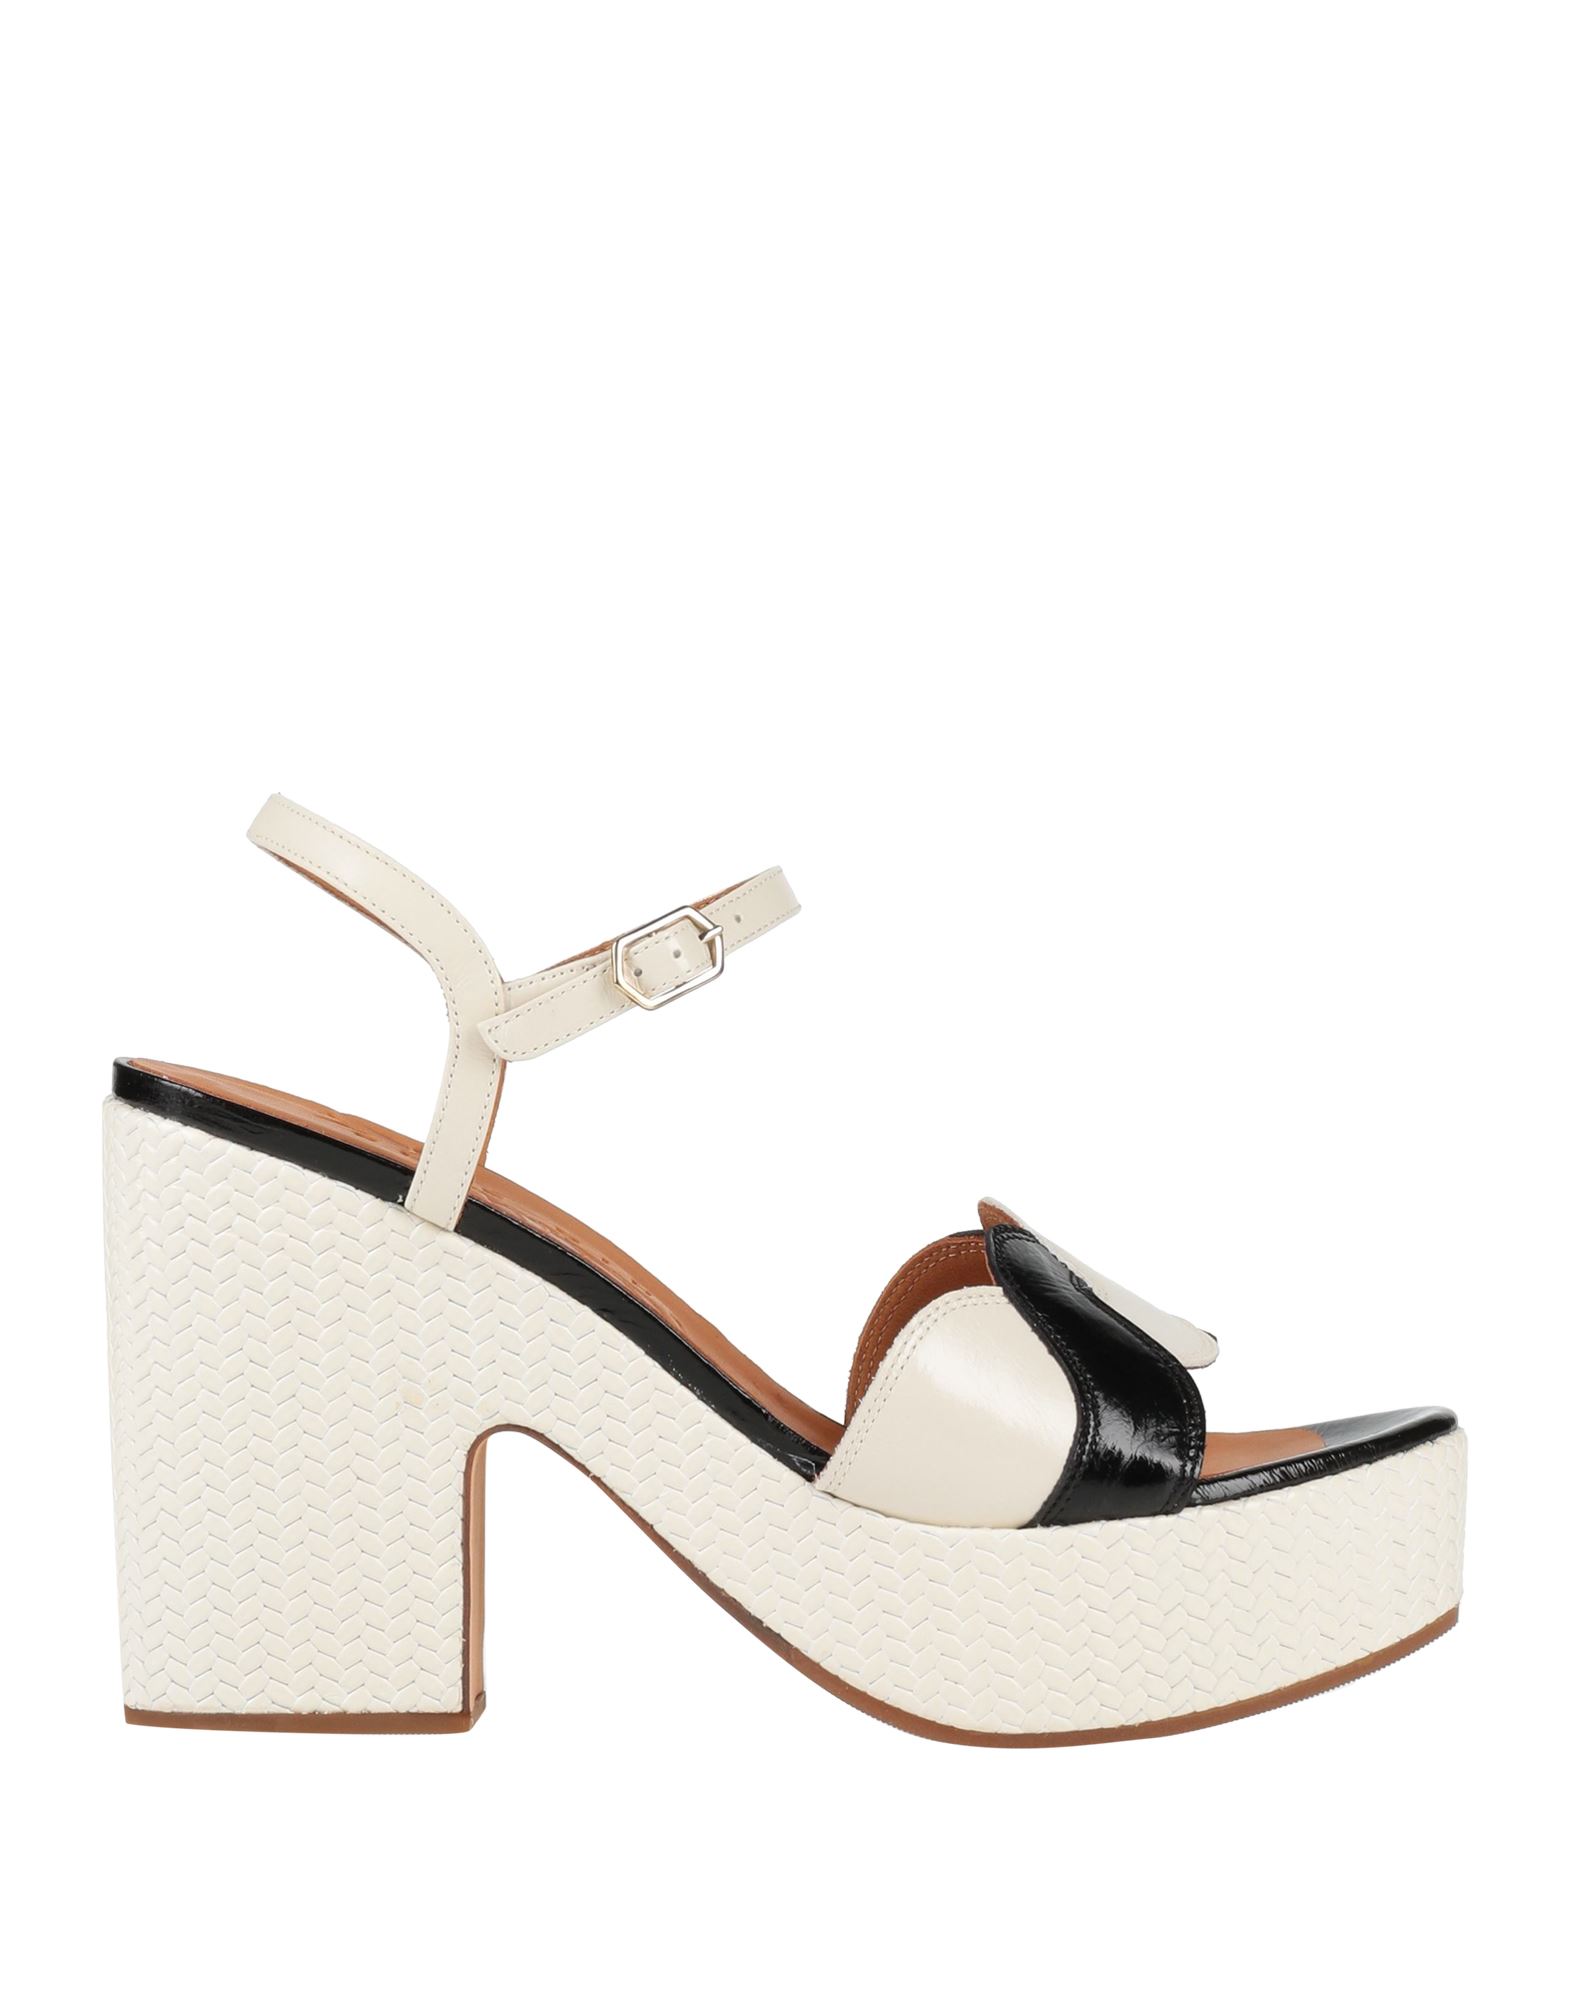 Chie Mihara Sandals In Off White